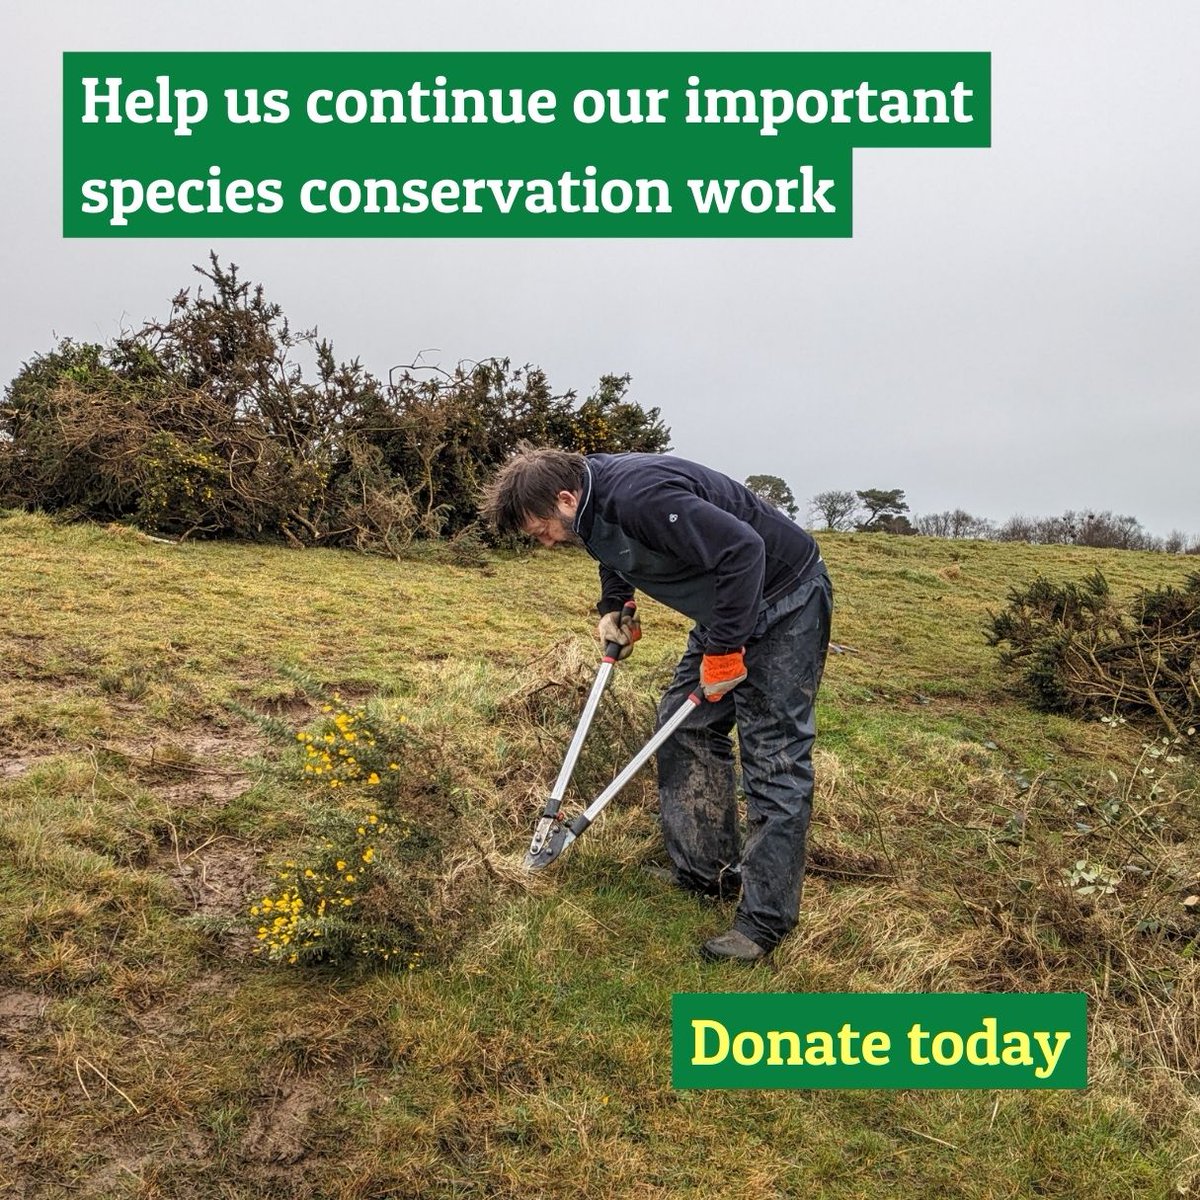 Can you help preserve our Botanical Treasures?🌱 🍄 Wild plants and fungi are the unsung heroes of our ecosystems. 📉 But, 45% of flowering plants are at risk of extinction and species are struggling Help us continue important species conservation work 👉 joinplantlife.org/3U4J79P